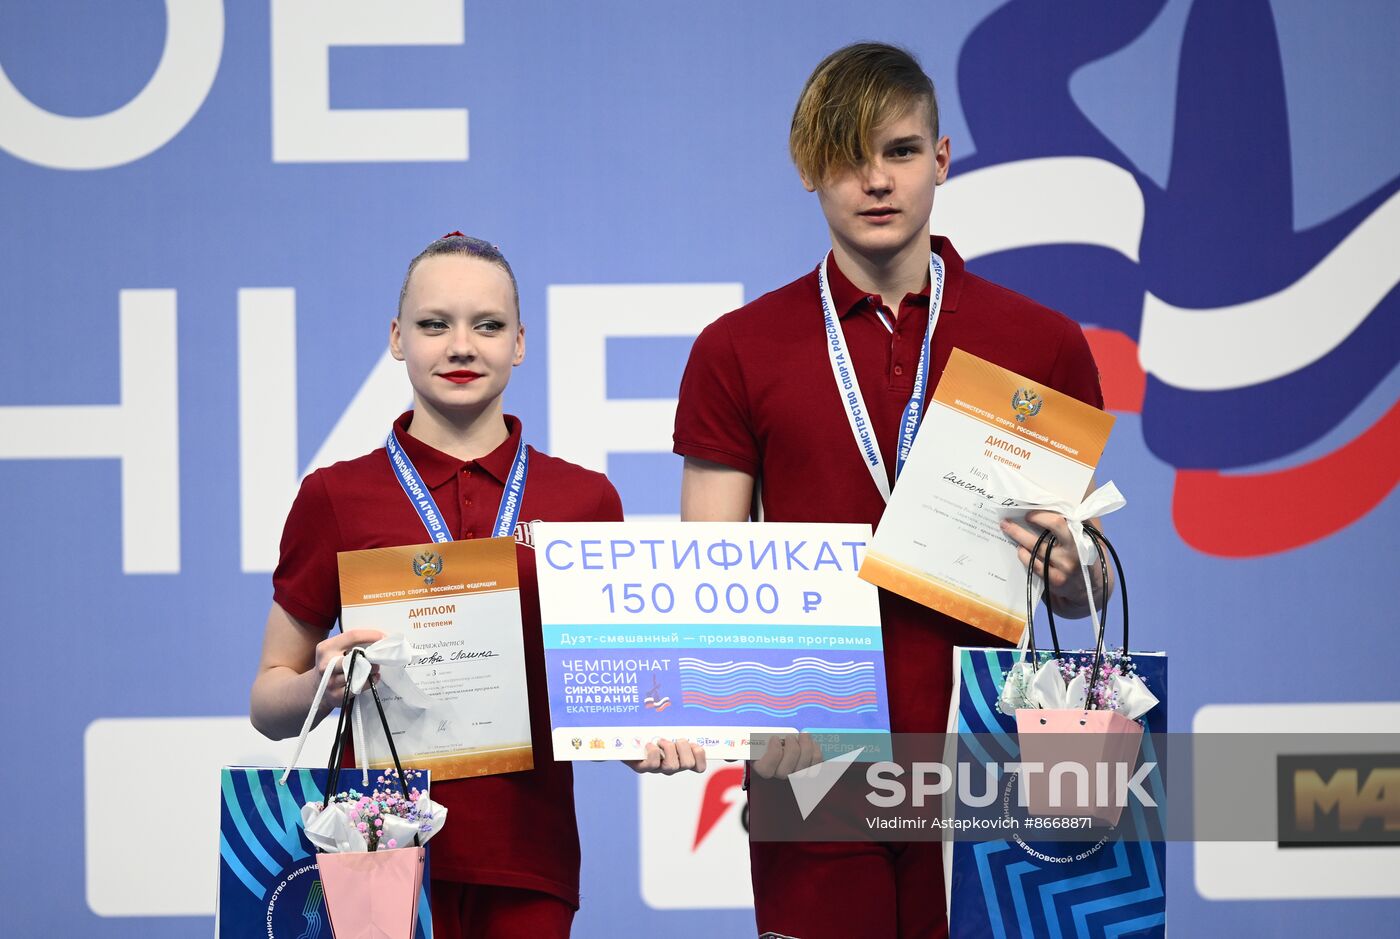 Russia Artistic Swimming Championships Mixed Duet Free